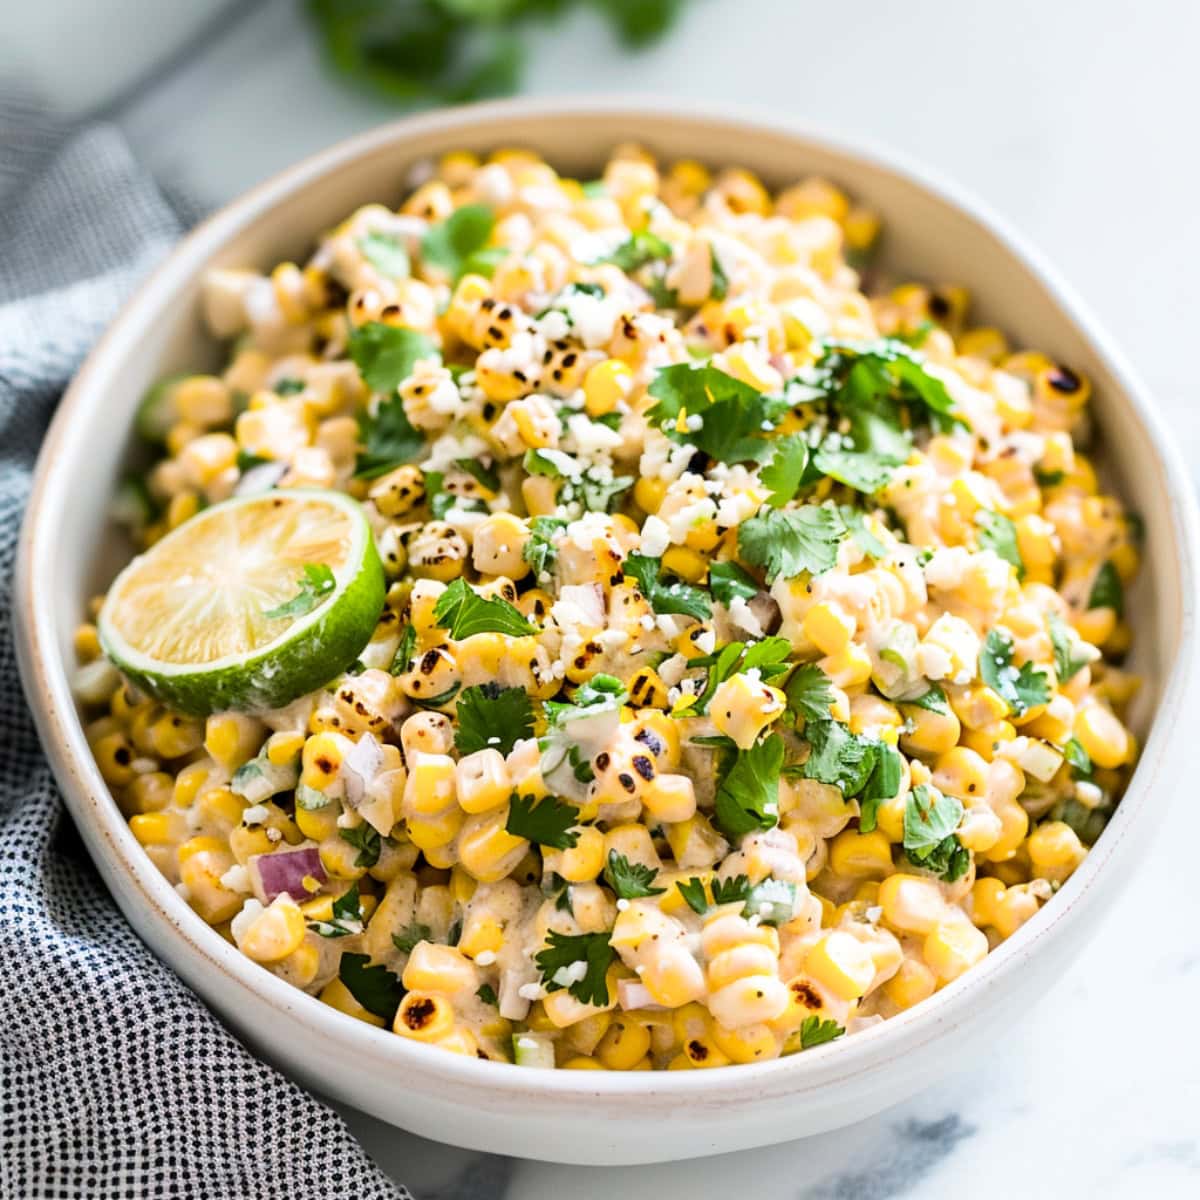 Vibrant Mexican street corn salad, featuring cotija cheese and a zesty lime dressing.